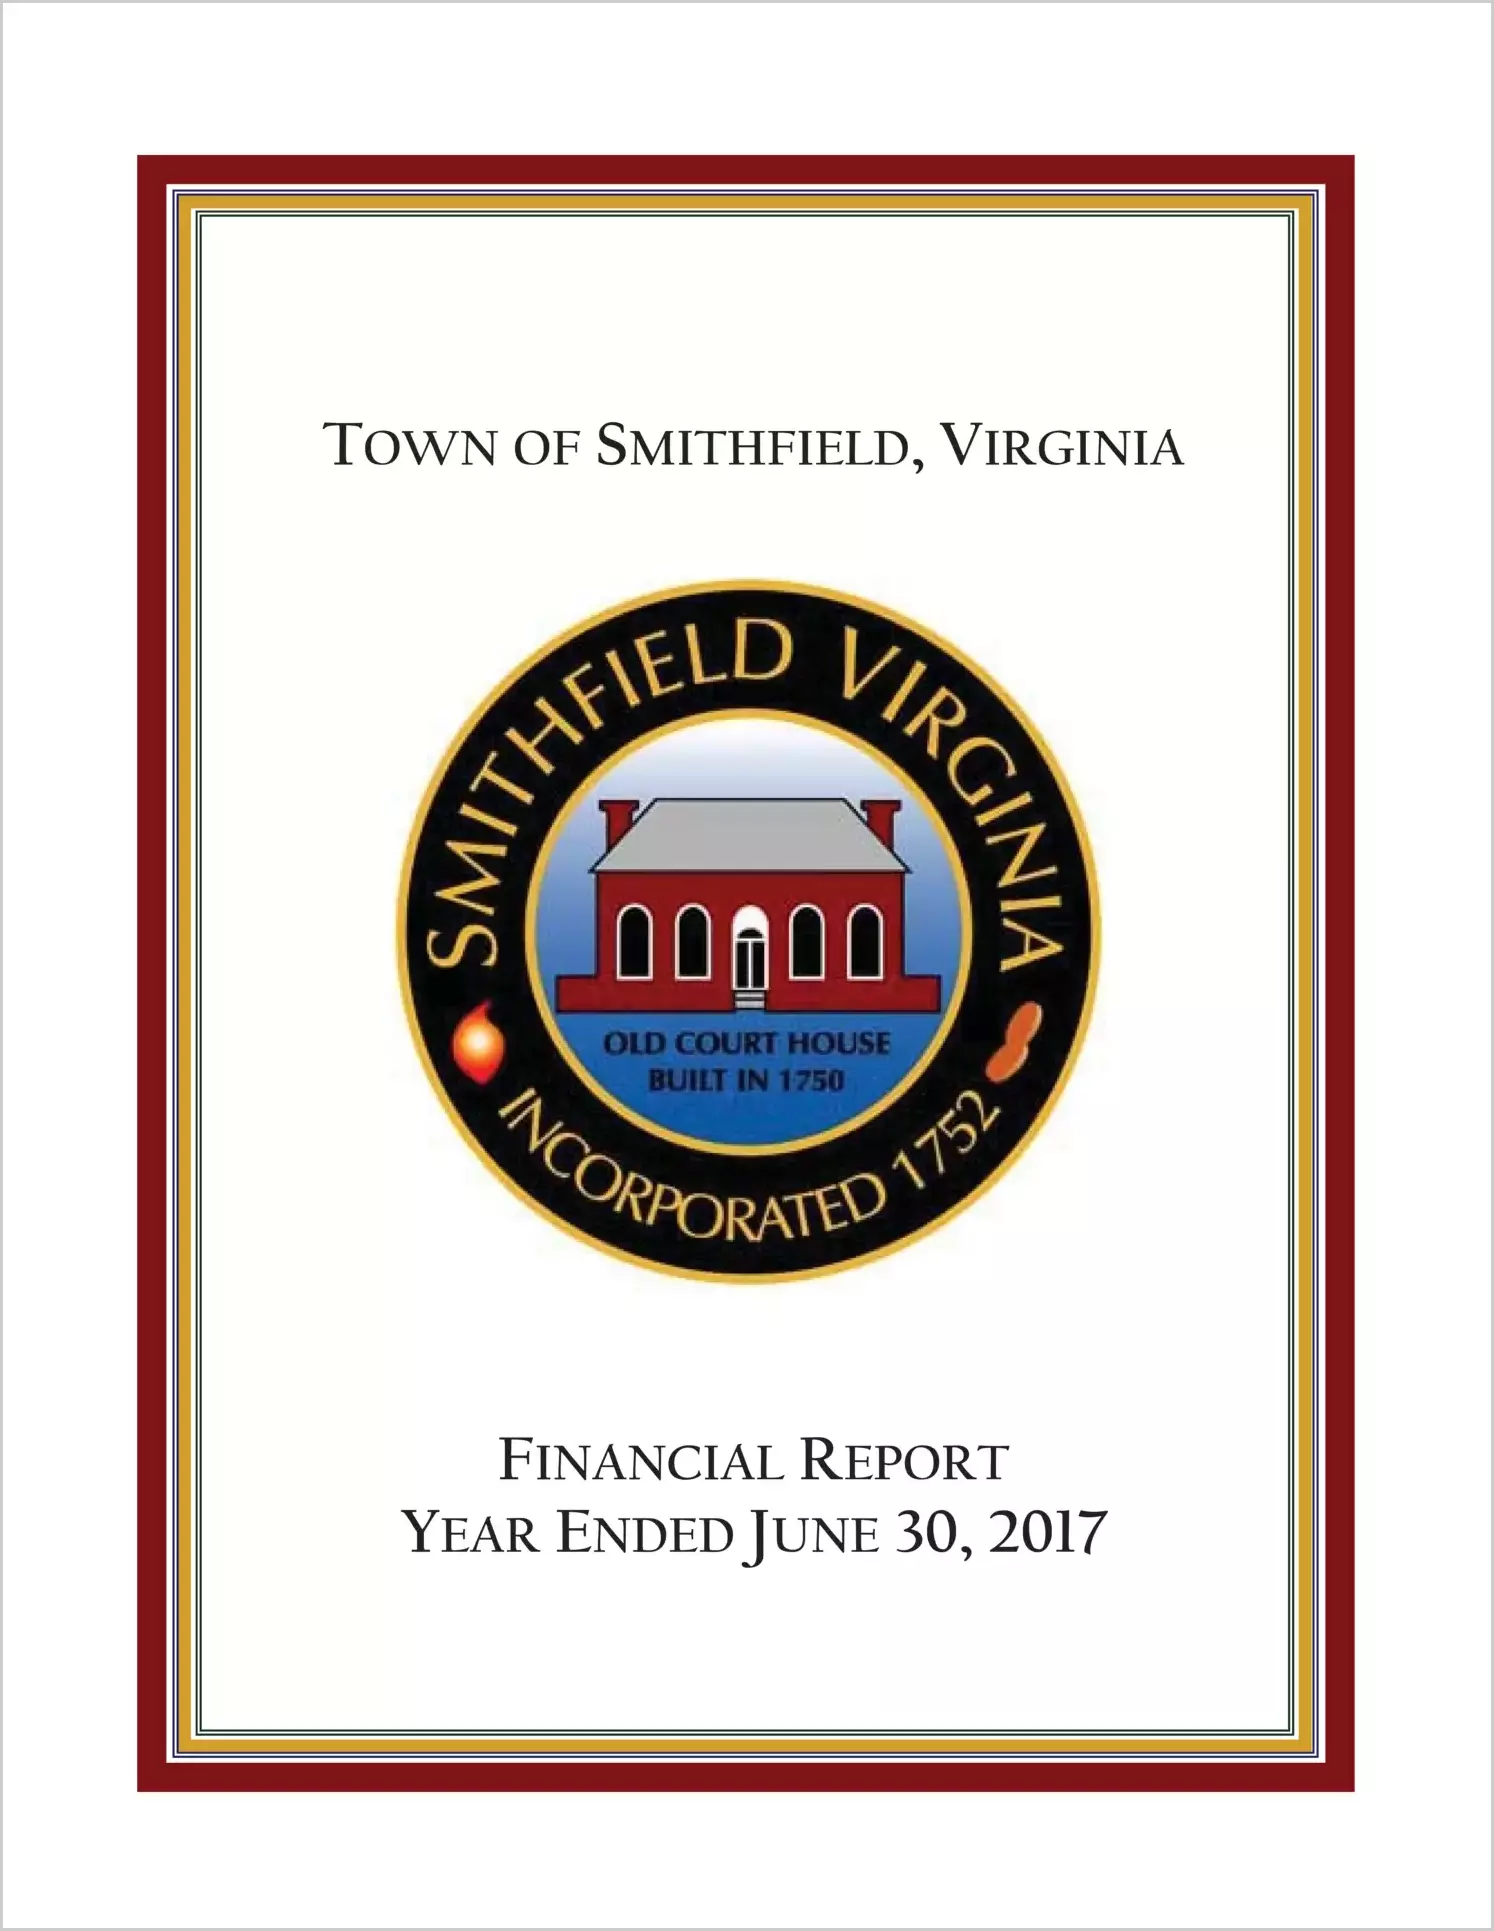 2017 Annual Financial Report for Town of Smithfield